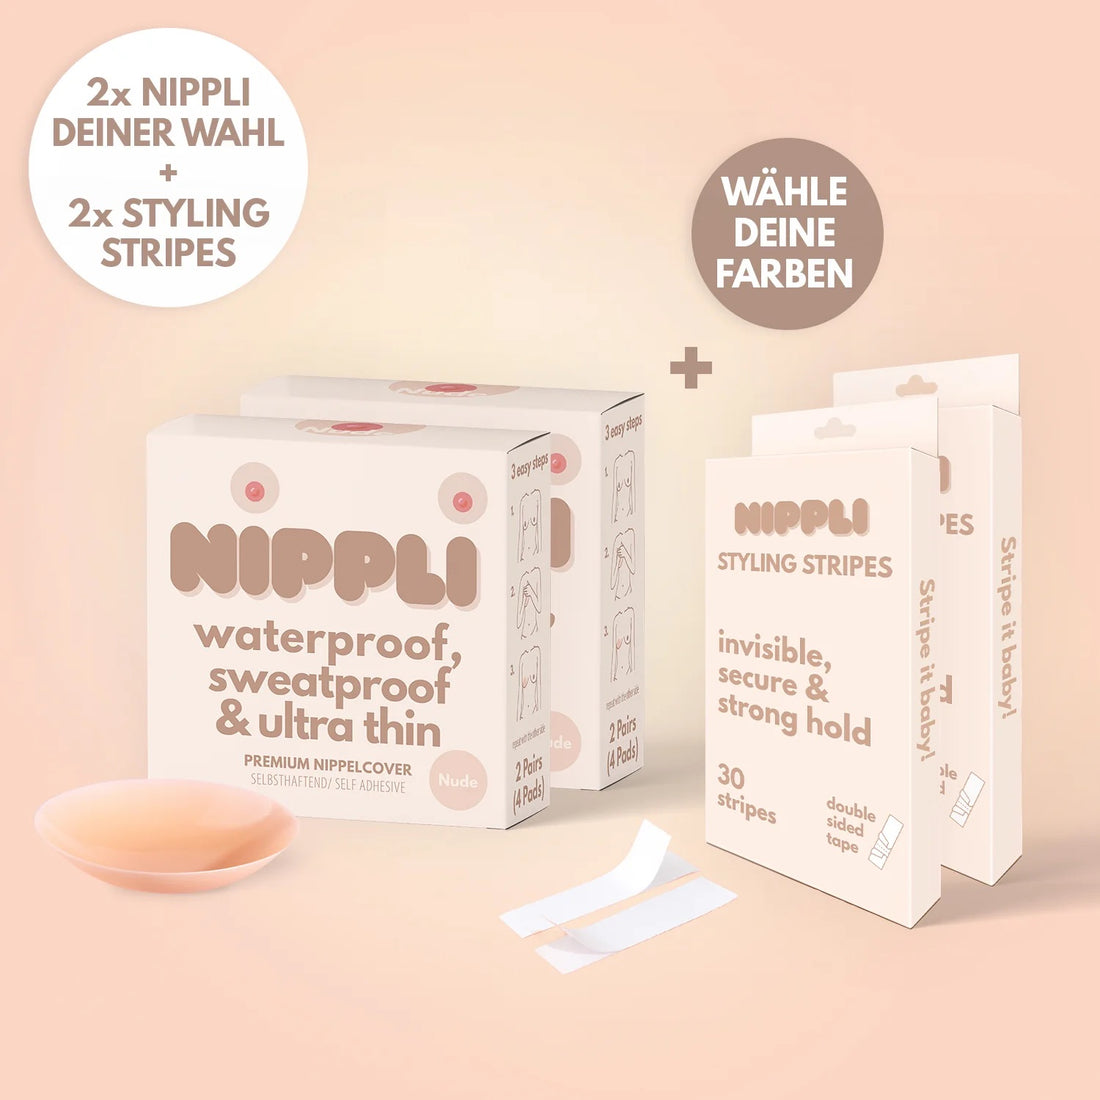 Nippli Nippelcover + Styling Stripes Bundle